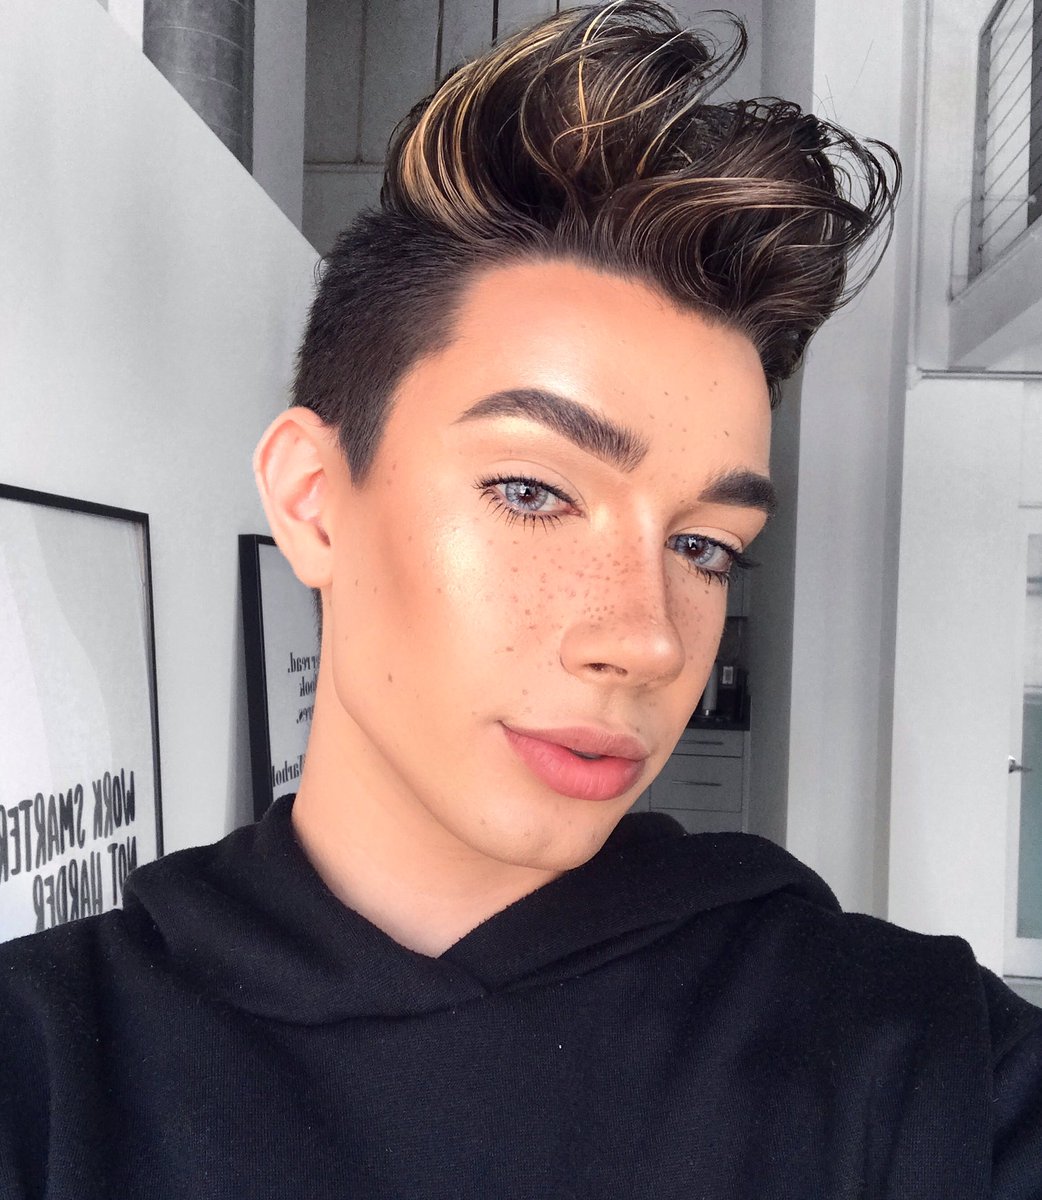 James Charles on X: forgot to post this here from yesterday